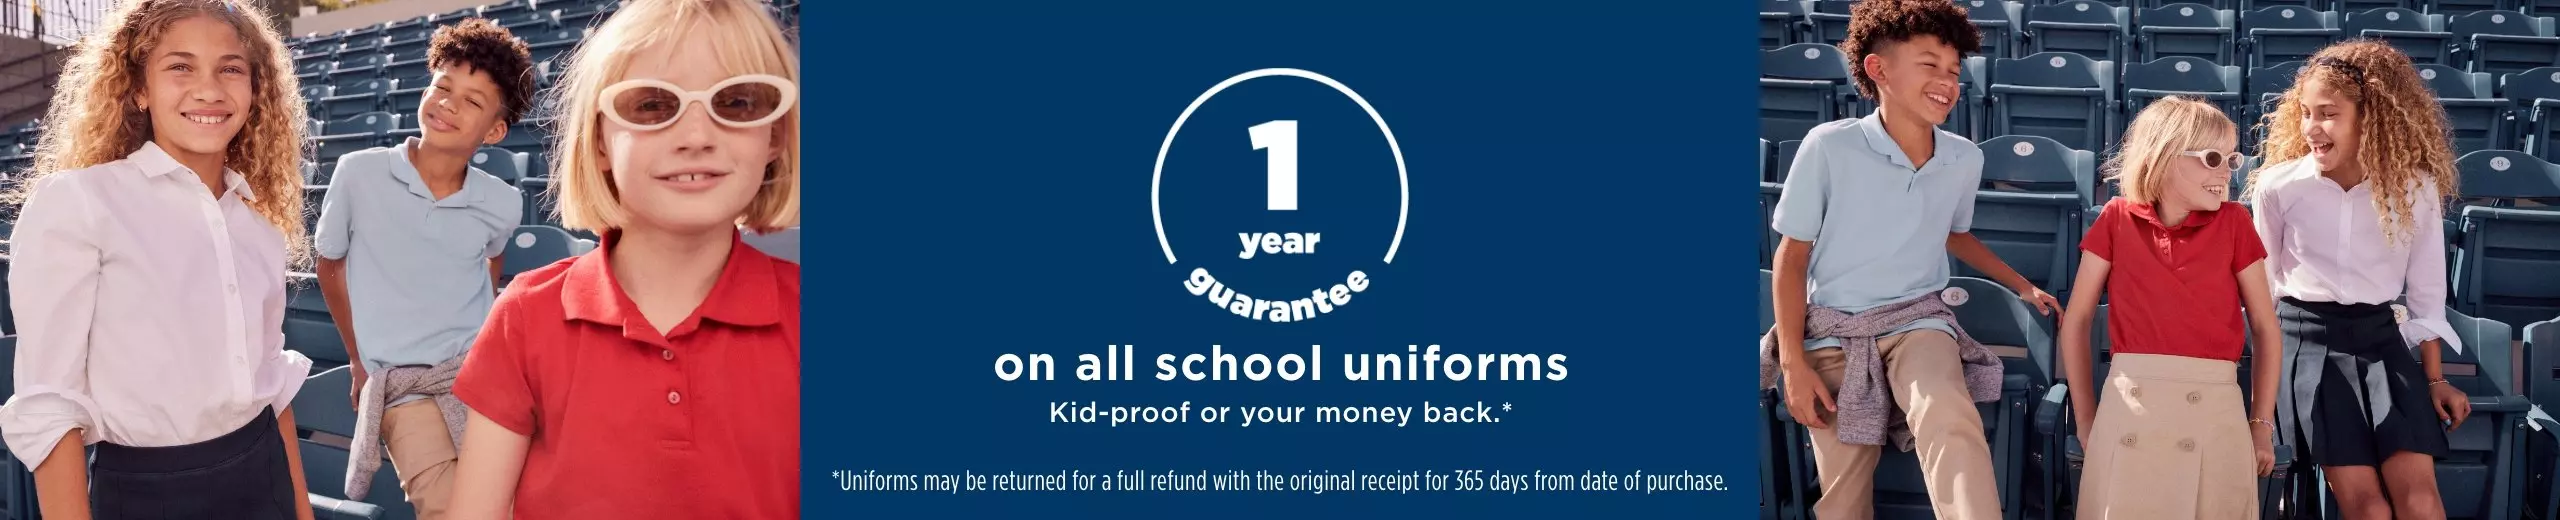 Uniforms may be returned for a full refund with the original receipt for 365 days from date of purchase. The uniform shop.